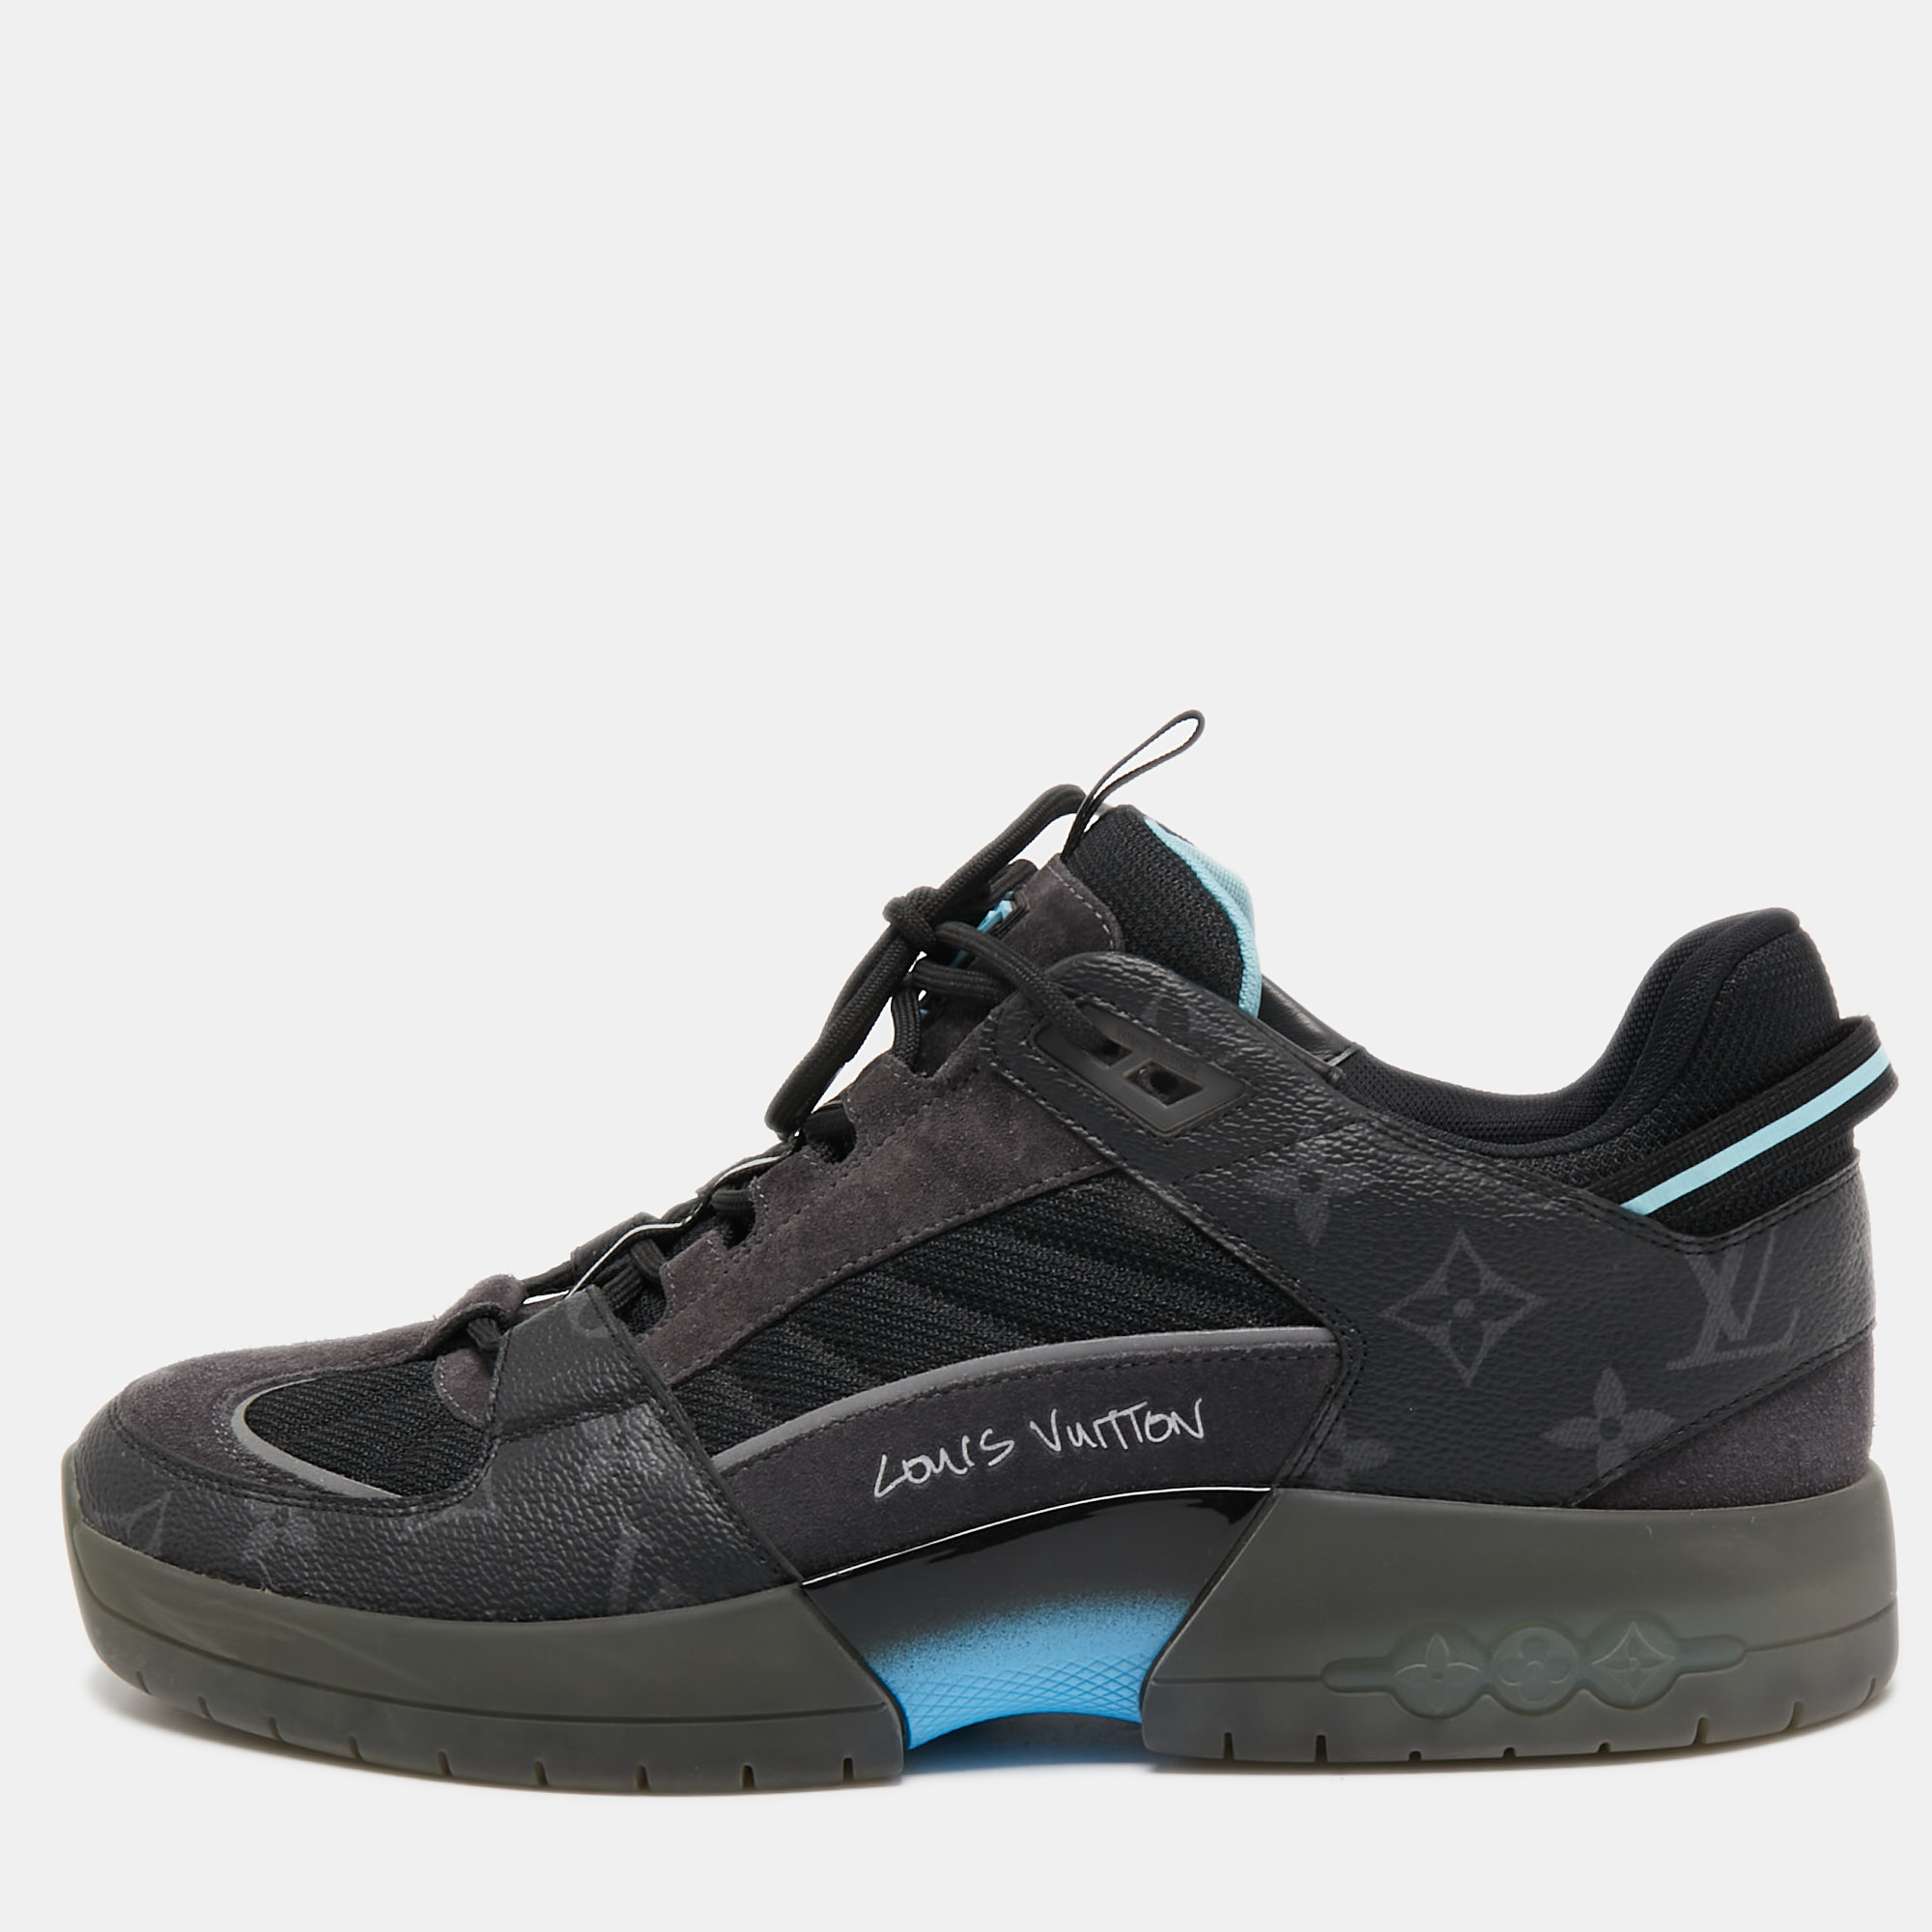 Louis Vuitton suede sneakers. Size LV 11. Black and Charcoal